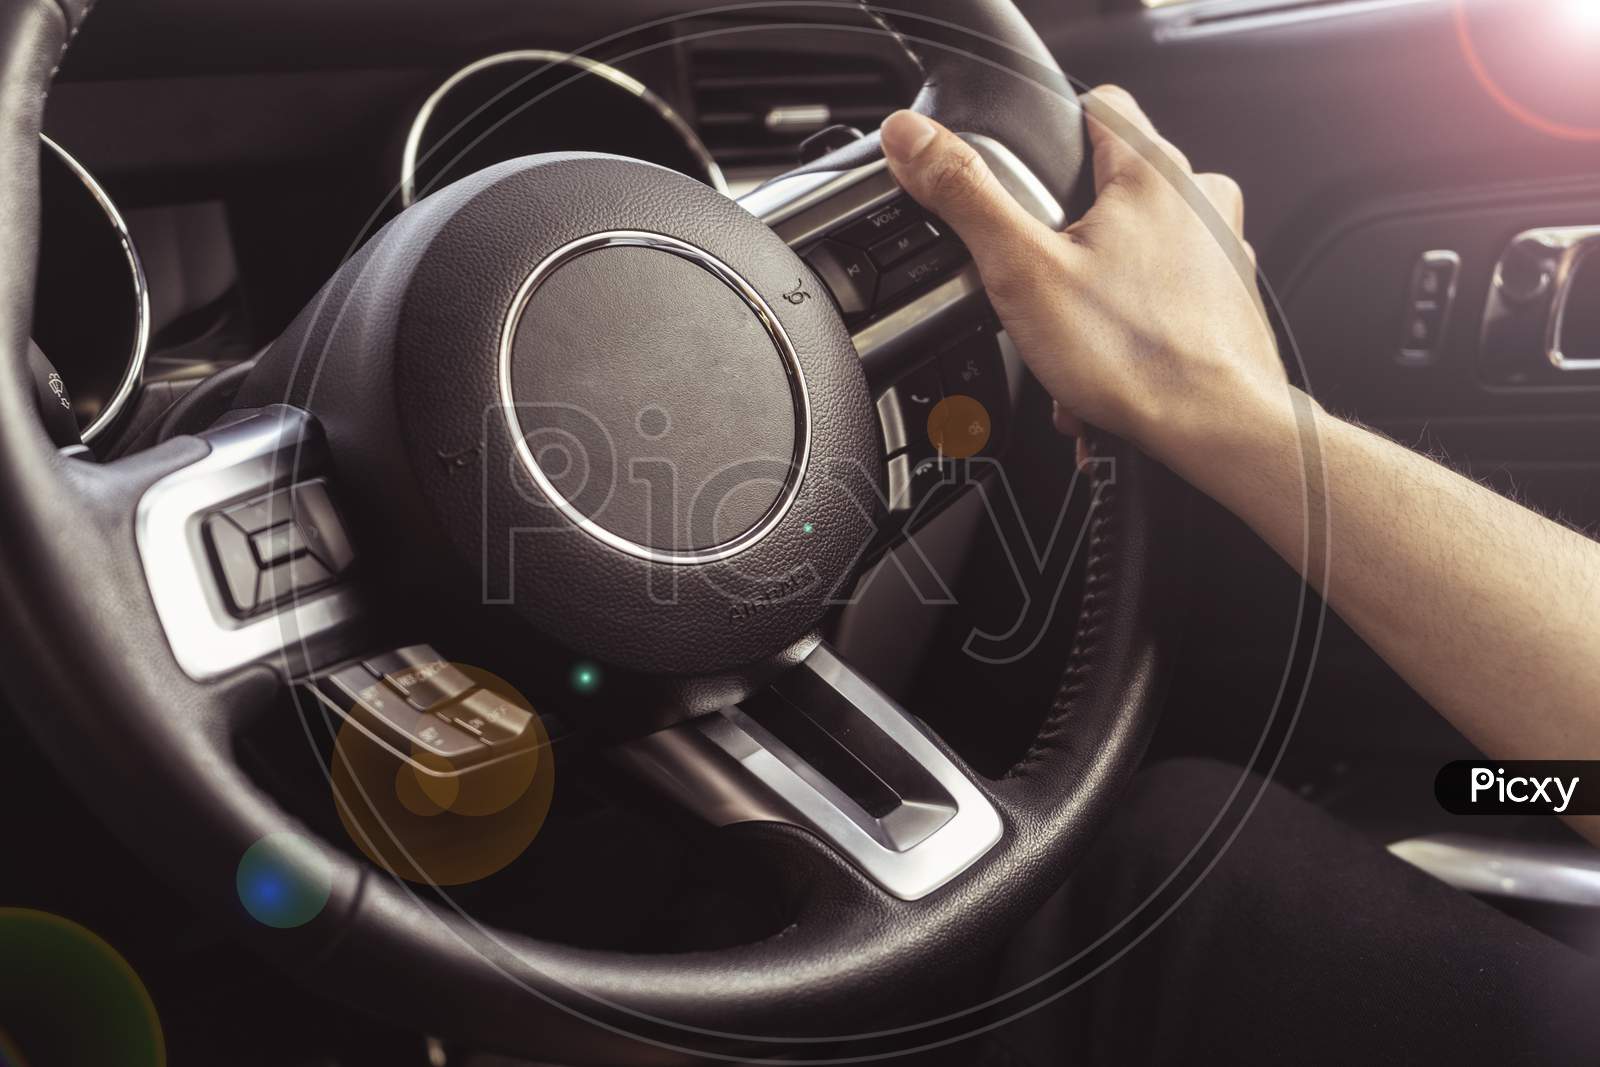 Close Up Of Hands Holding The Steering Wheel Of A Car. Interior Of A Luxury Car.